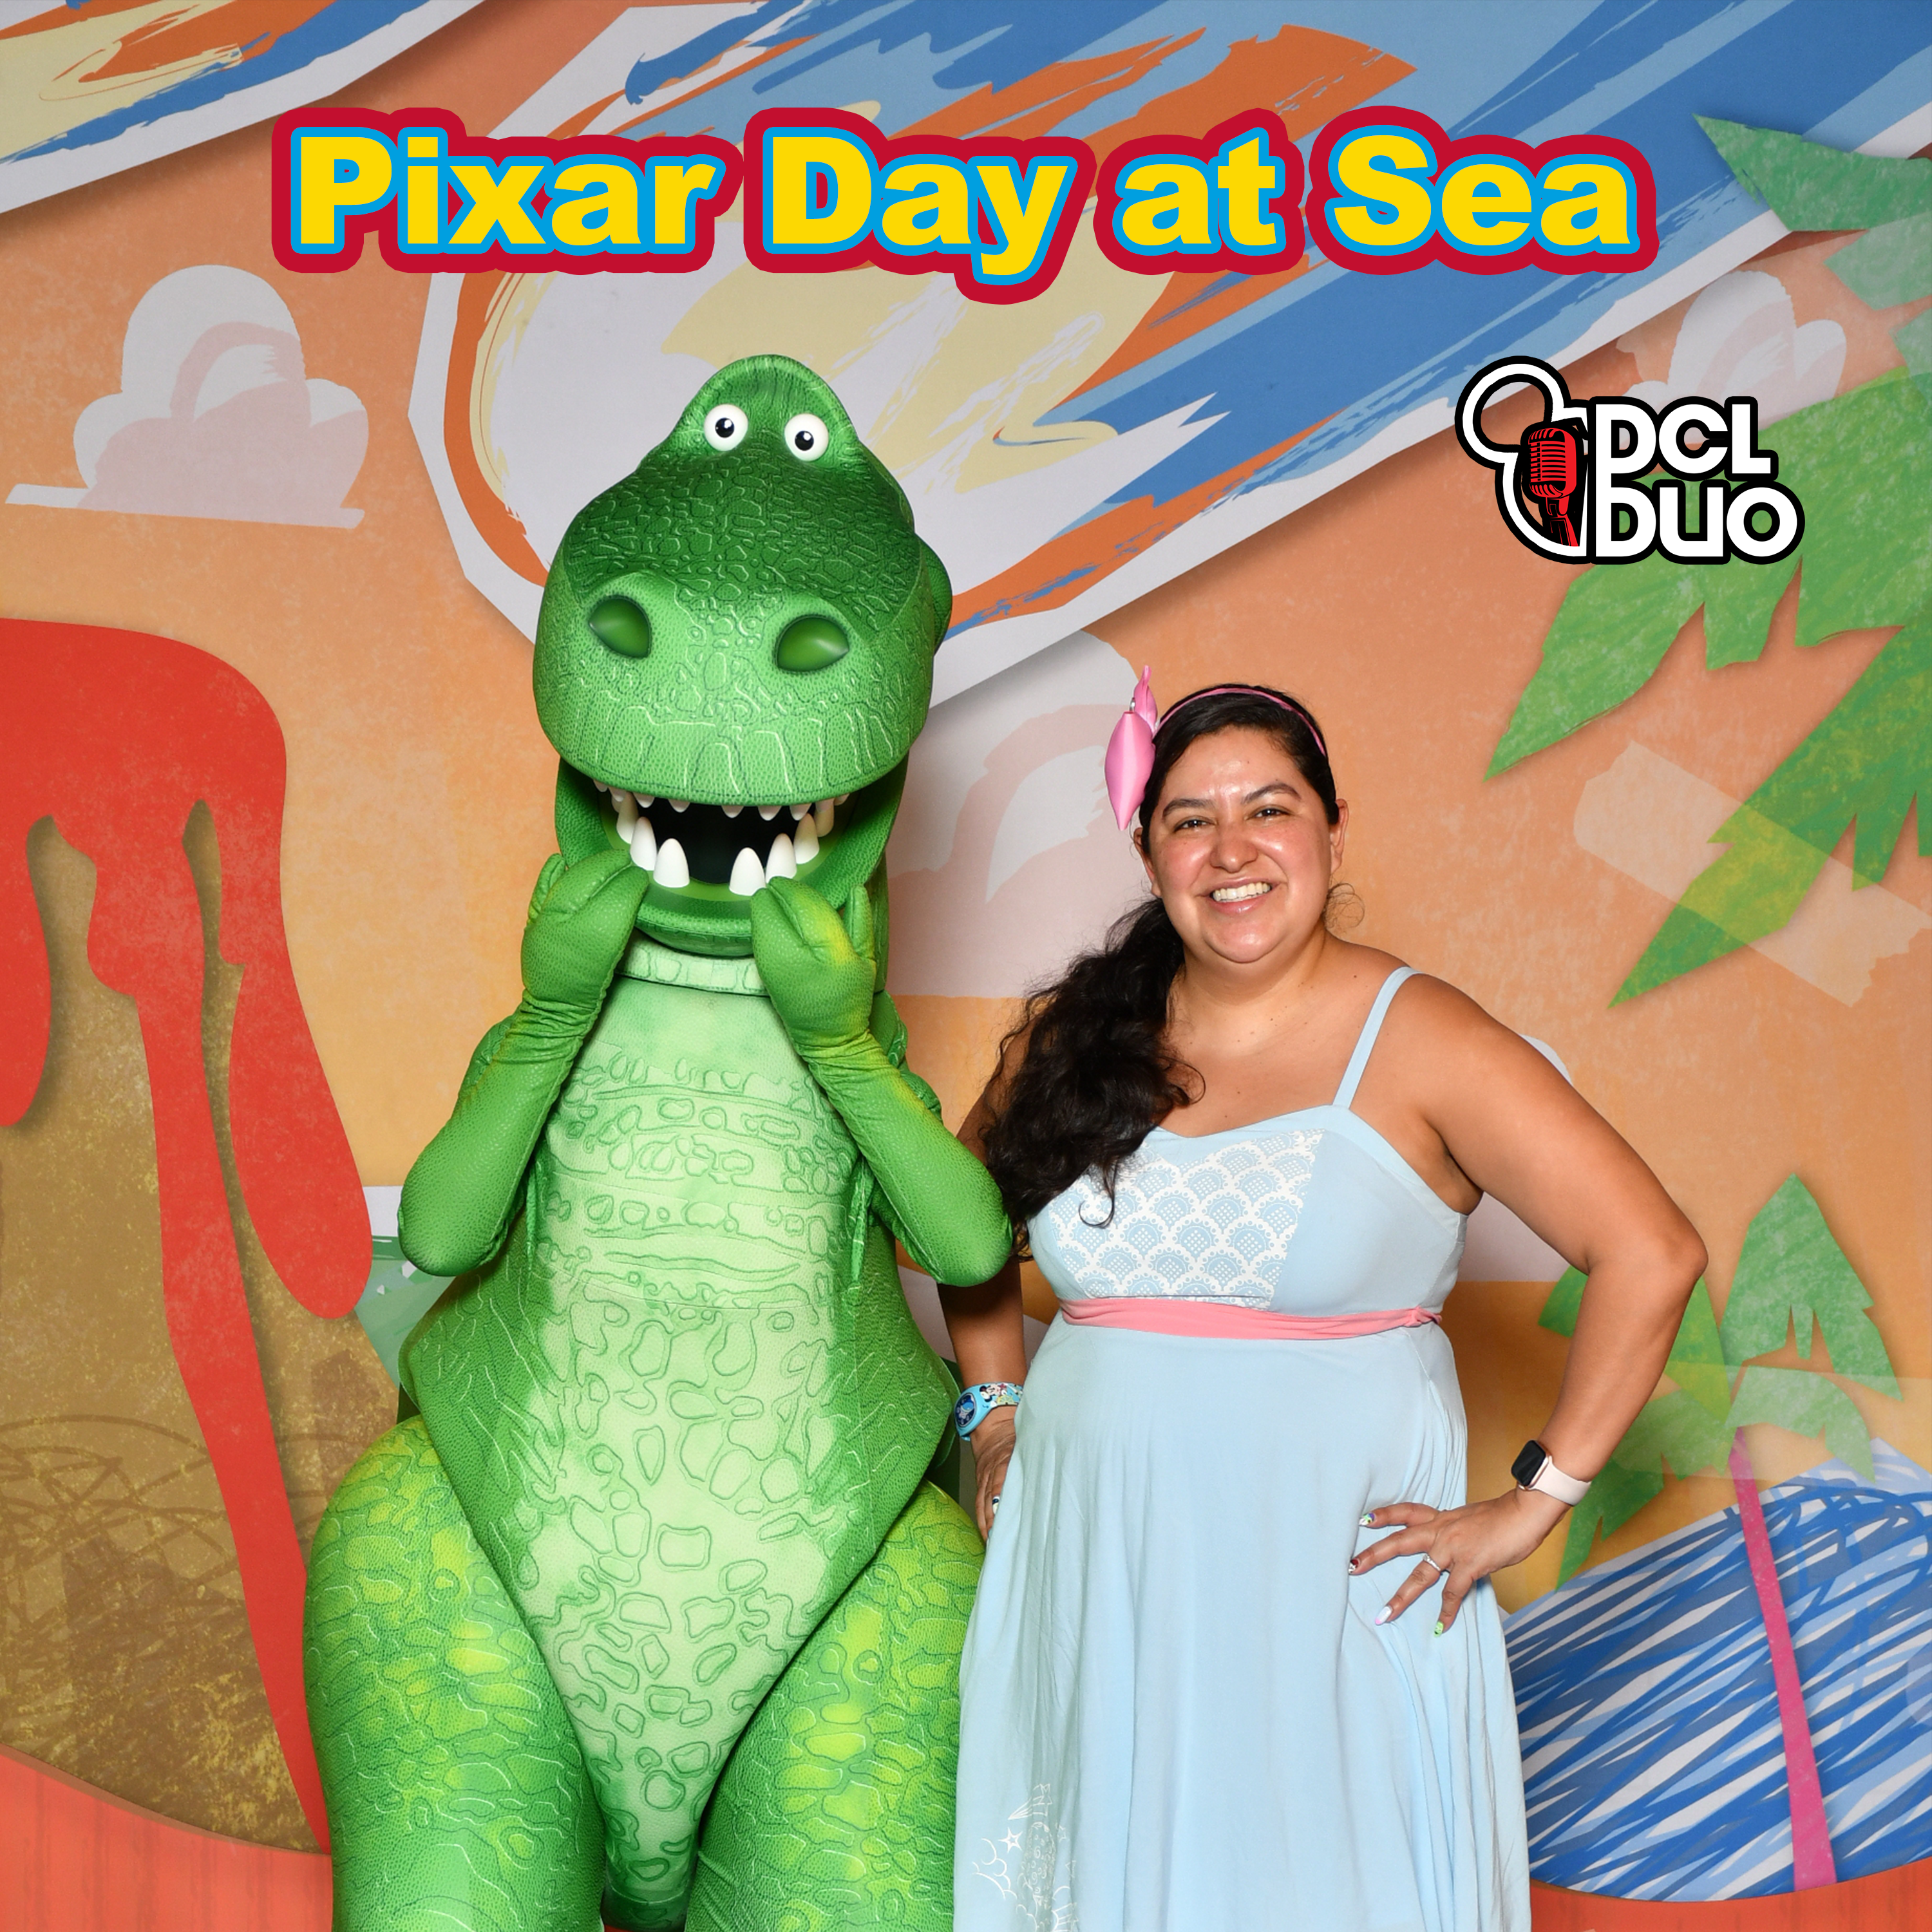 Ep. 427 - Hey Howdy Hey: A First Time Cruiser and Pixar Day at Sea on the Disney Fantasy